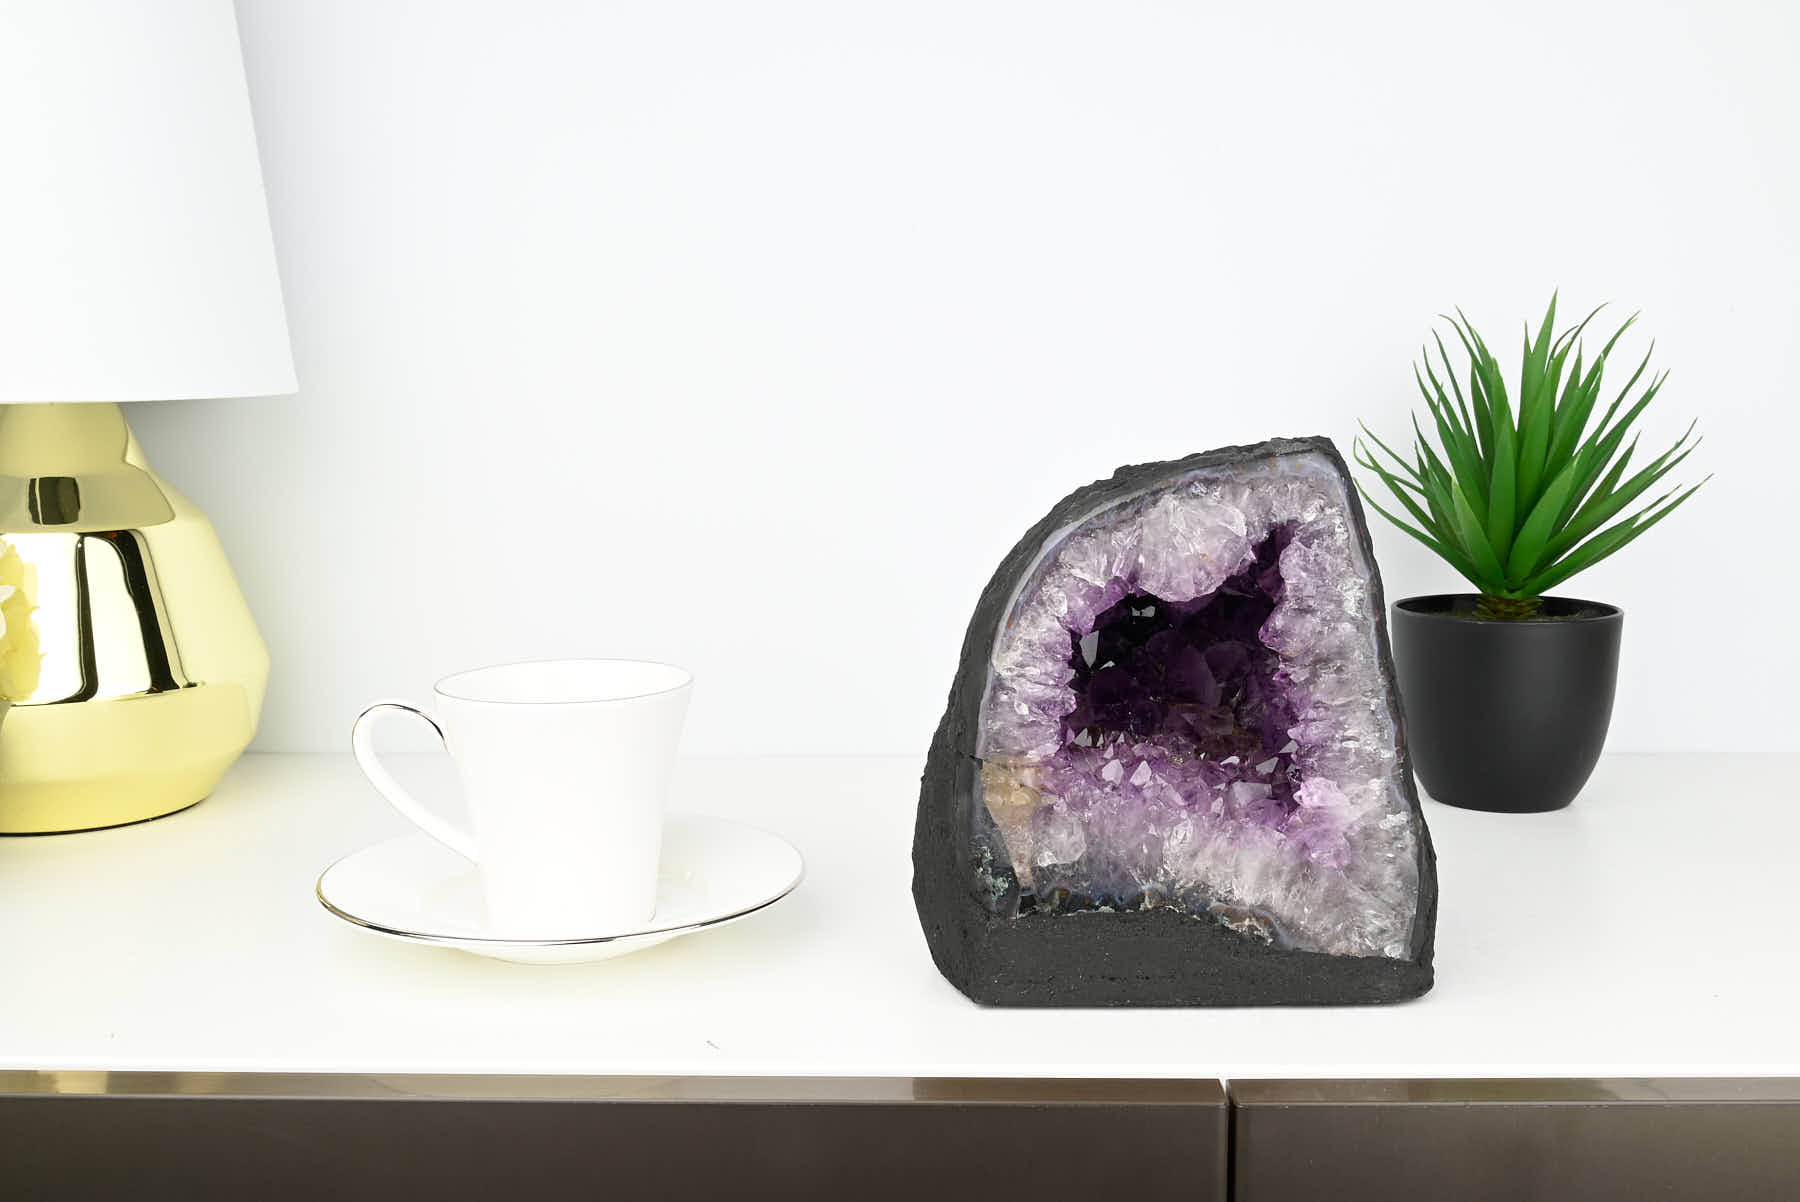 Extra Quality Amethyst Cathedral - 3.63kg, 17cm tall - #CAAMET-10014